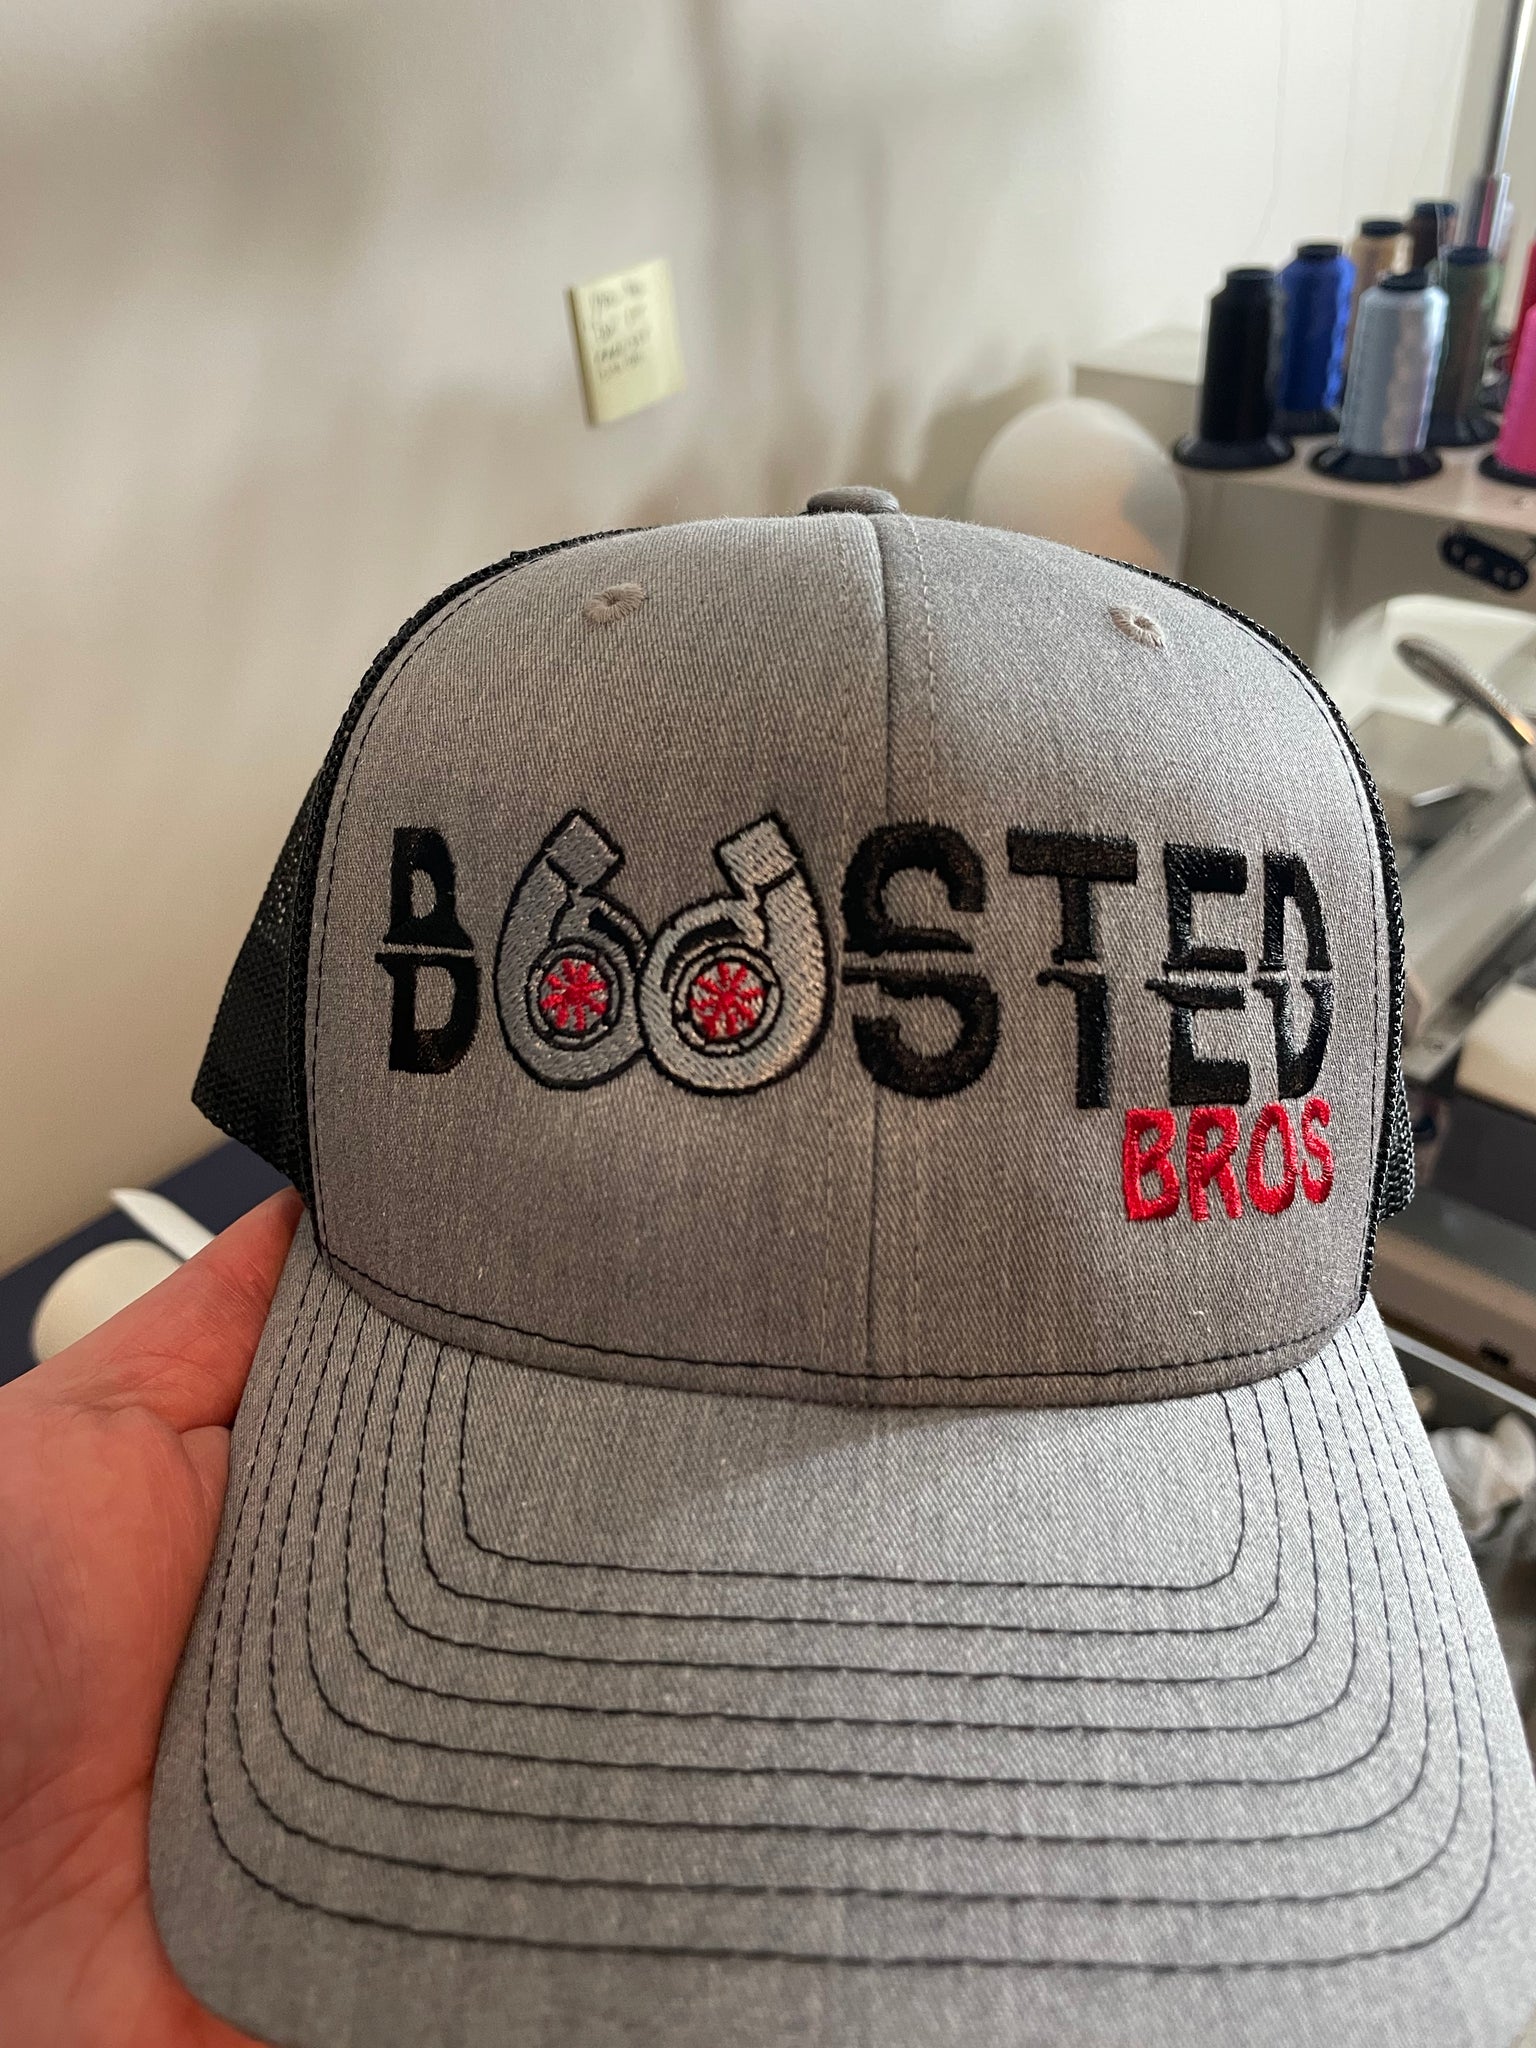 Boosted Bros